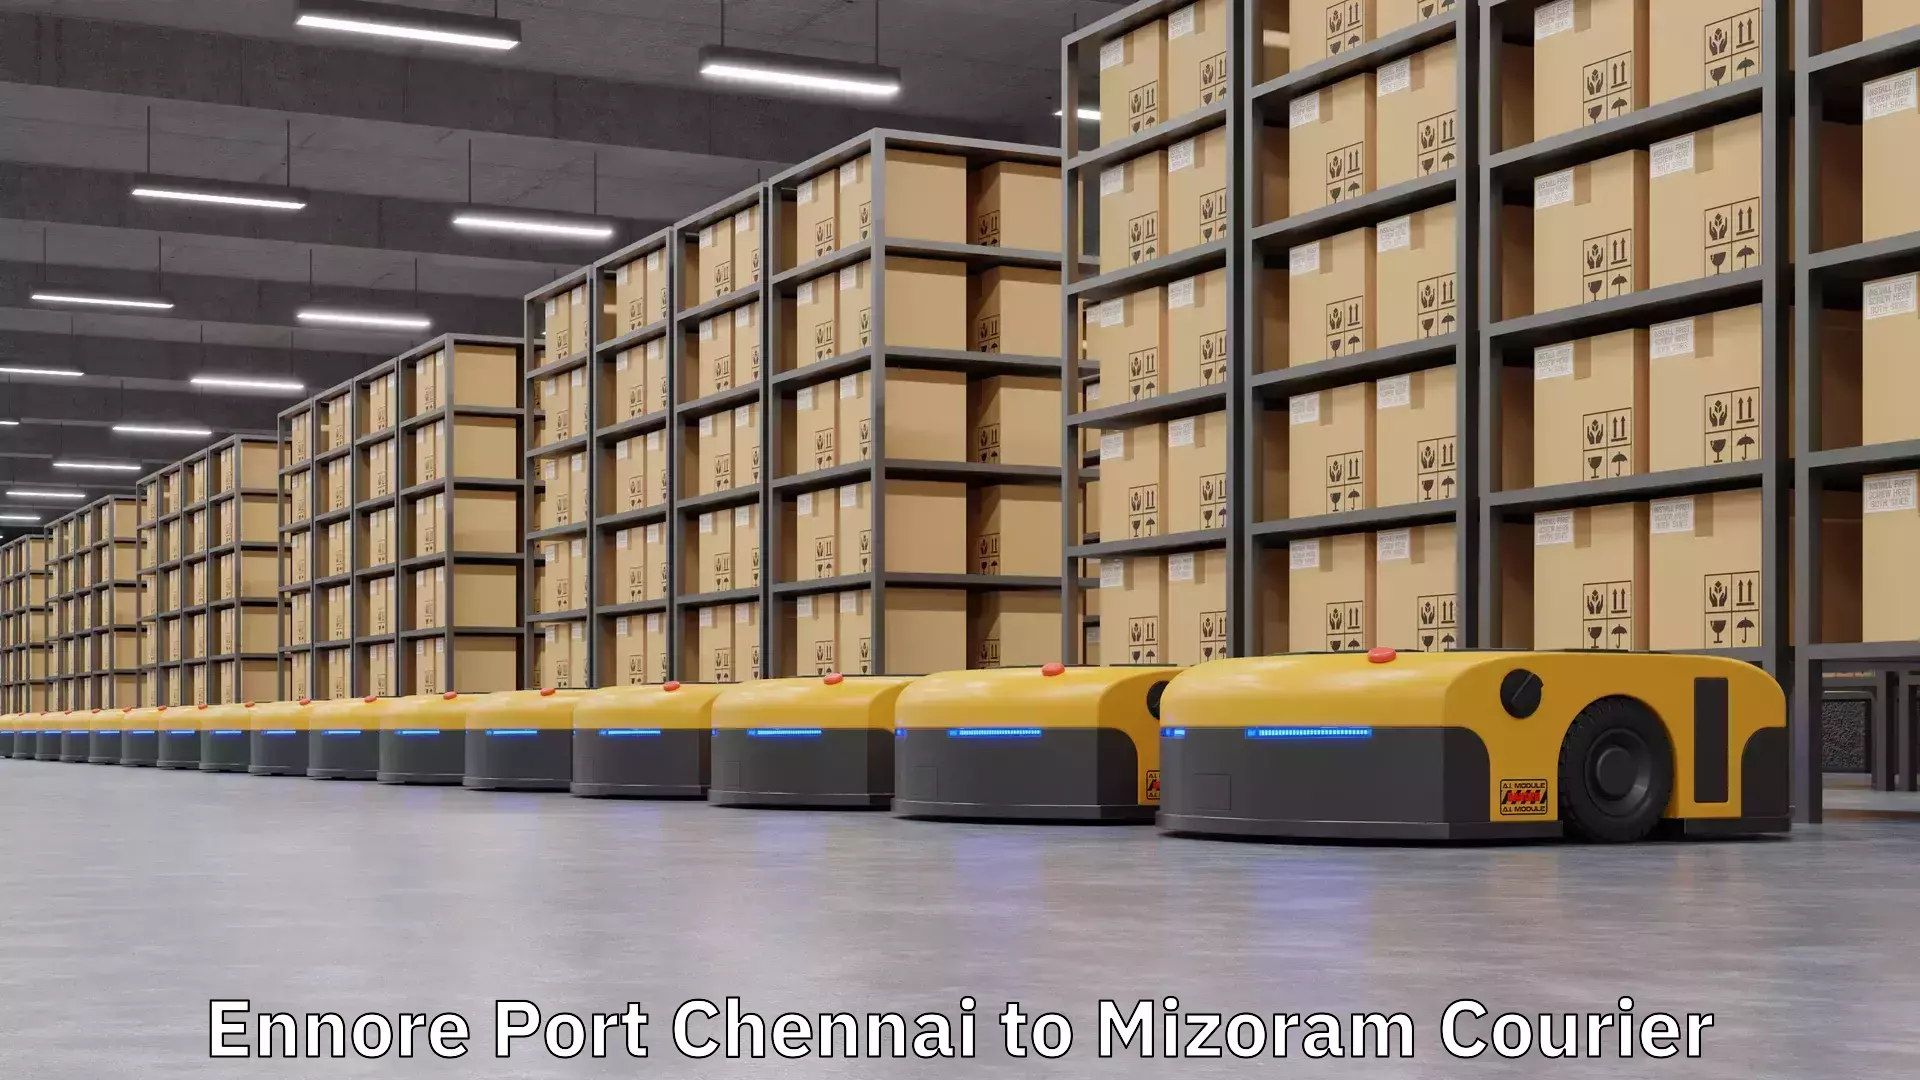 Long distance courier Ennore Port Chennai to Mizoram